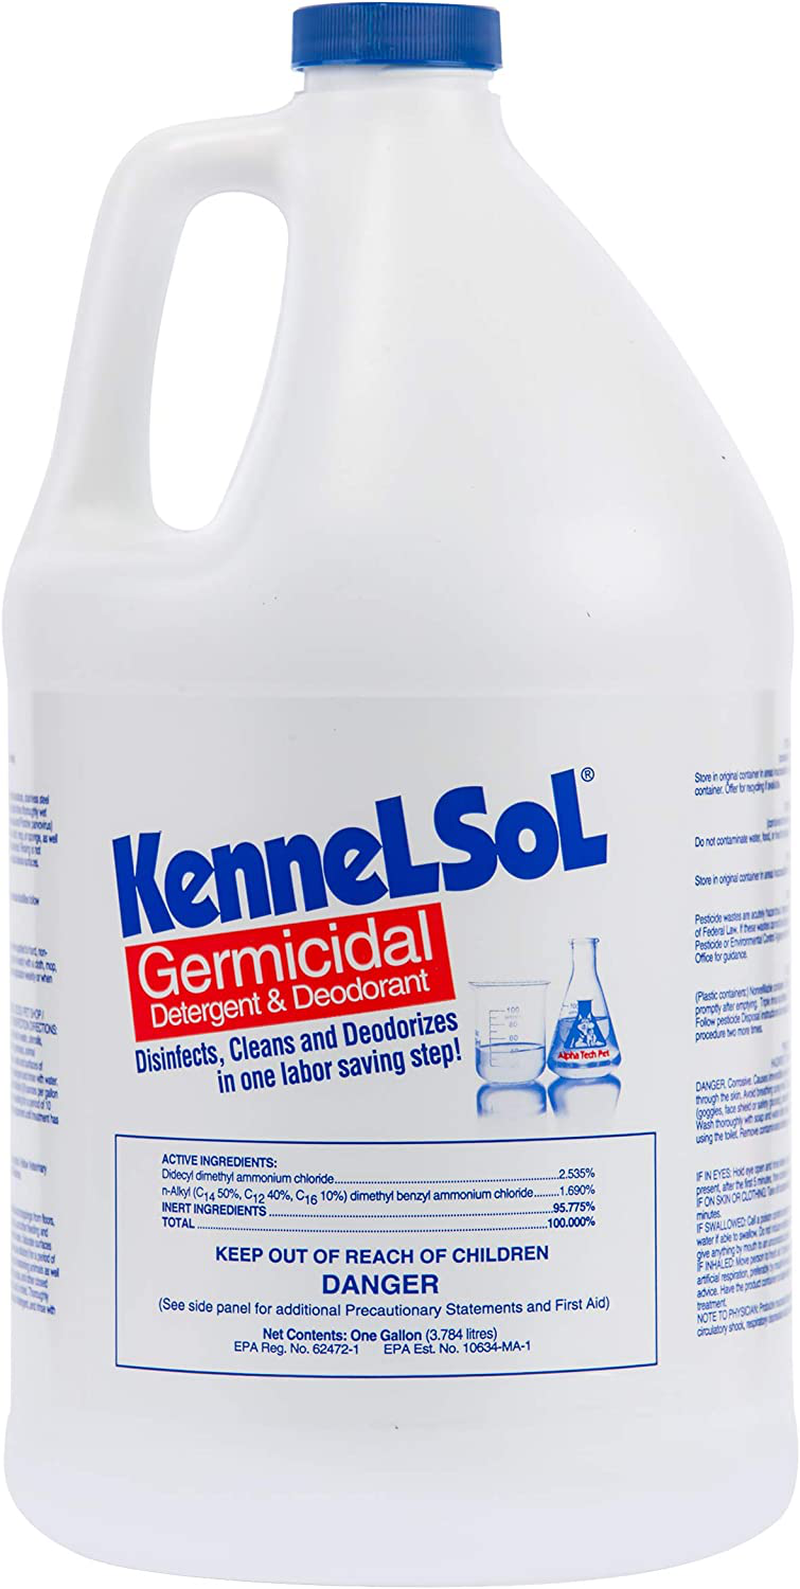 Kennelsol Dog Crate Cleaner and Disinfectant | Cleaning Concentrate, Kills Bacteria & Viruses, Parvo Disinfectant | Kennel Cleaner | 1 Gallon